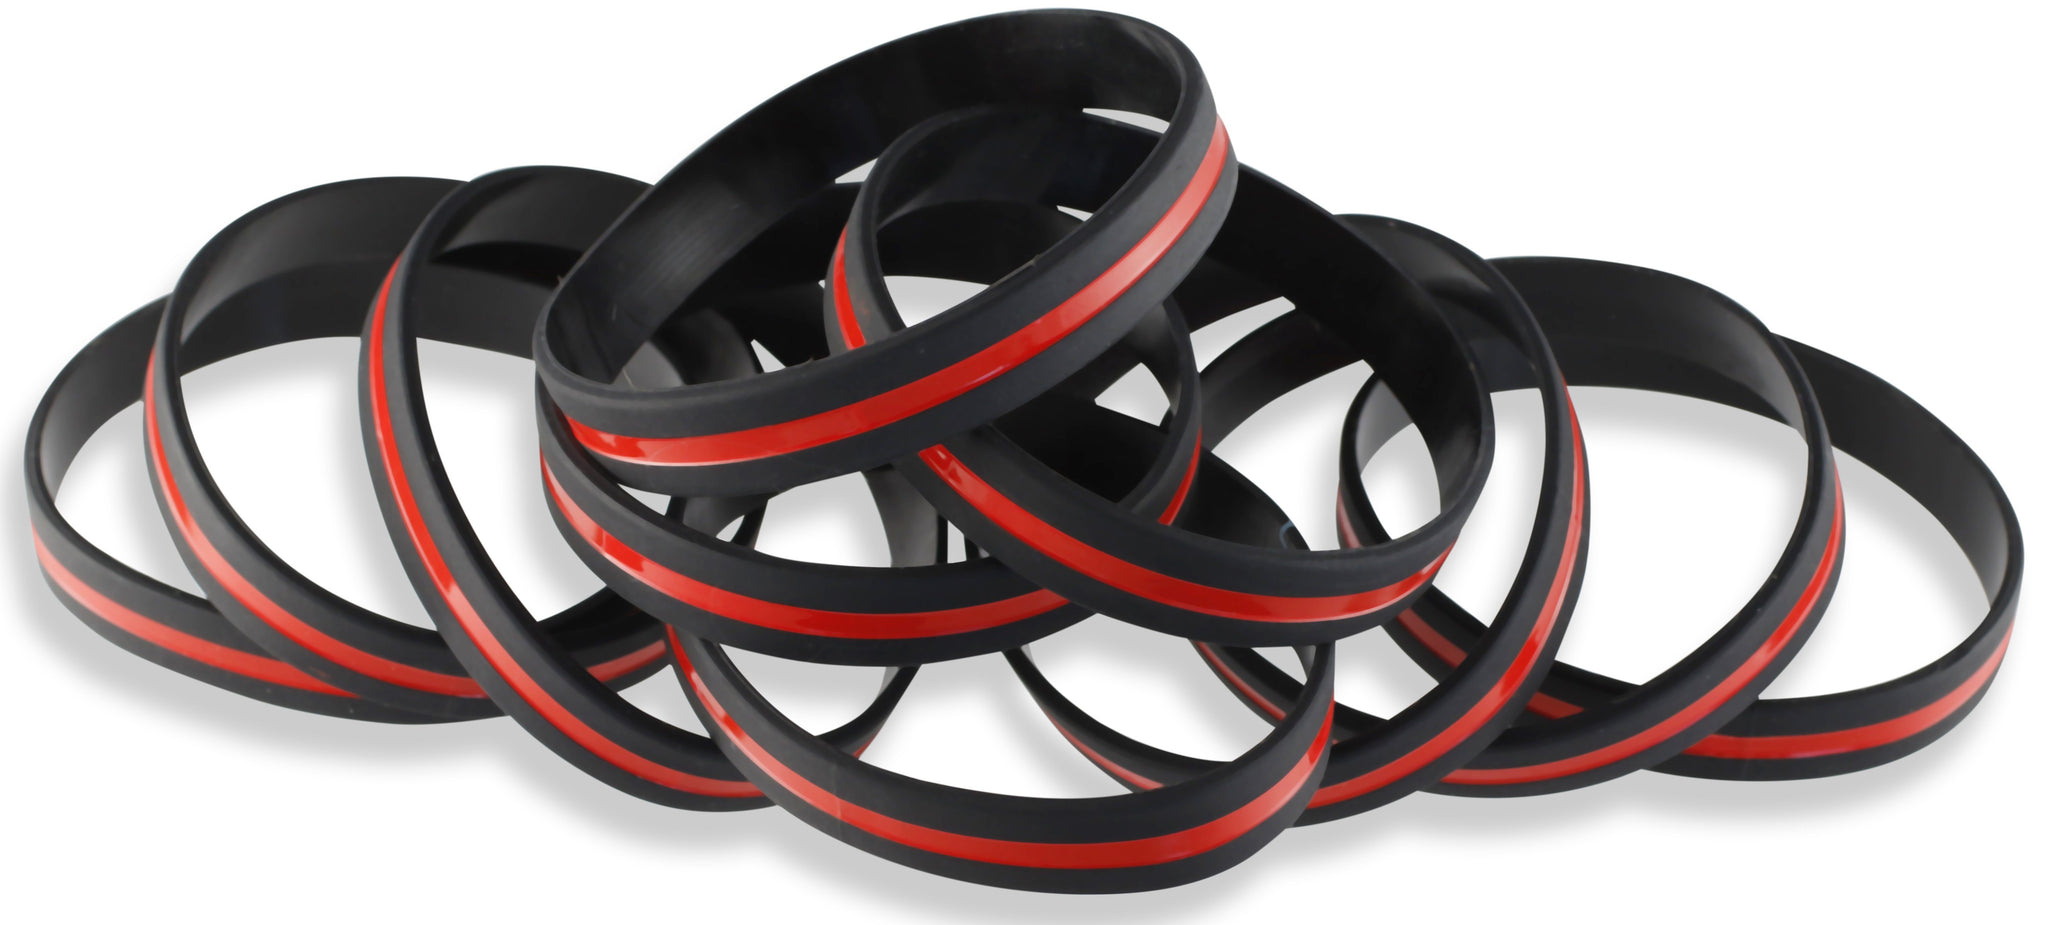 Firefighter Awareness Thin Red Line Silicone Wristband Bracelets Wristband WizardPins 100 Wristbands 